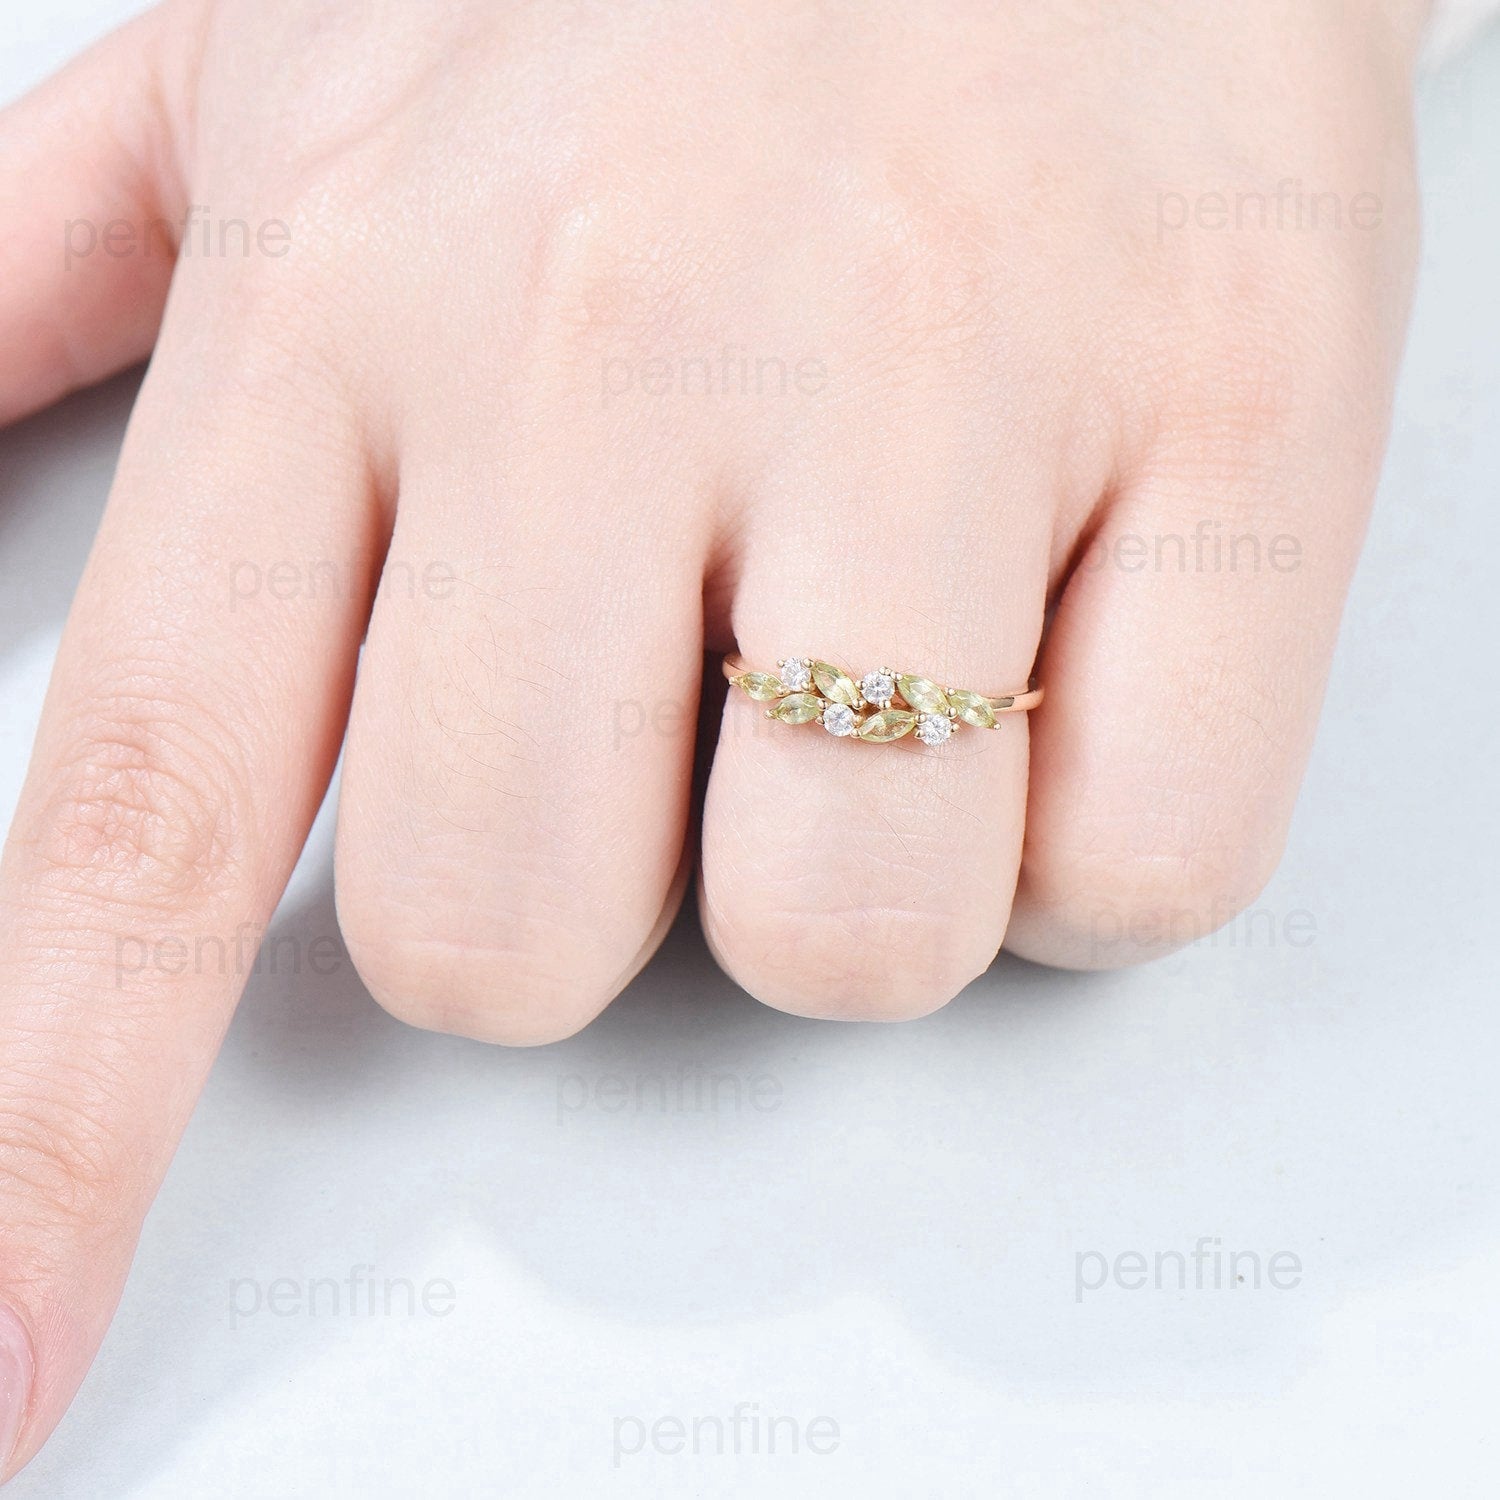 Vintage Peridot Wedding Band, Marquise cut yellow gold wedding ring, Unique cluster peridot Stacking matching Bridal ring, Anniversary gift - PENFINE